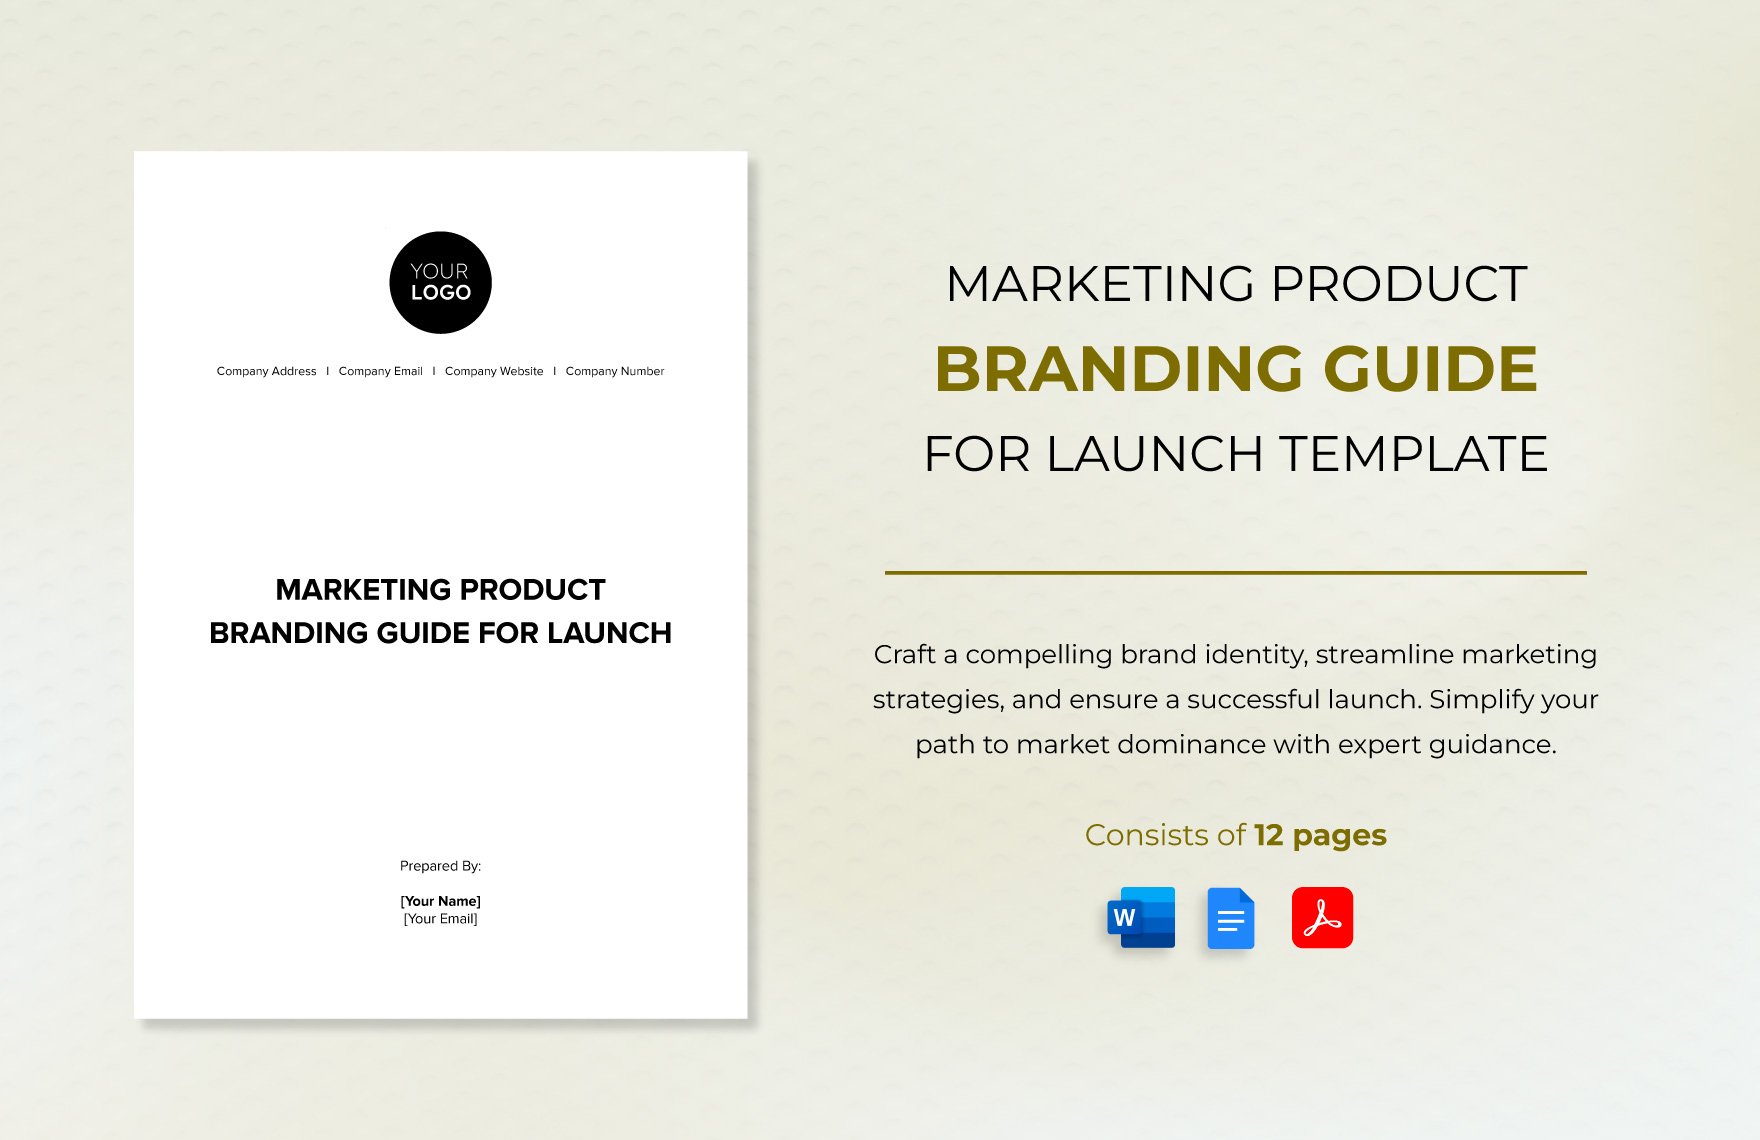 Marketing Product Branding Guide for Launch Template